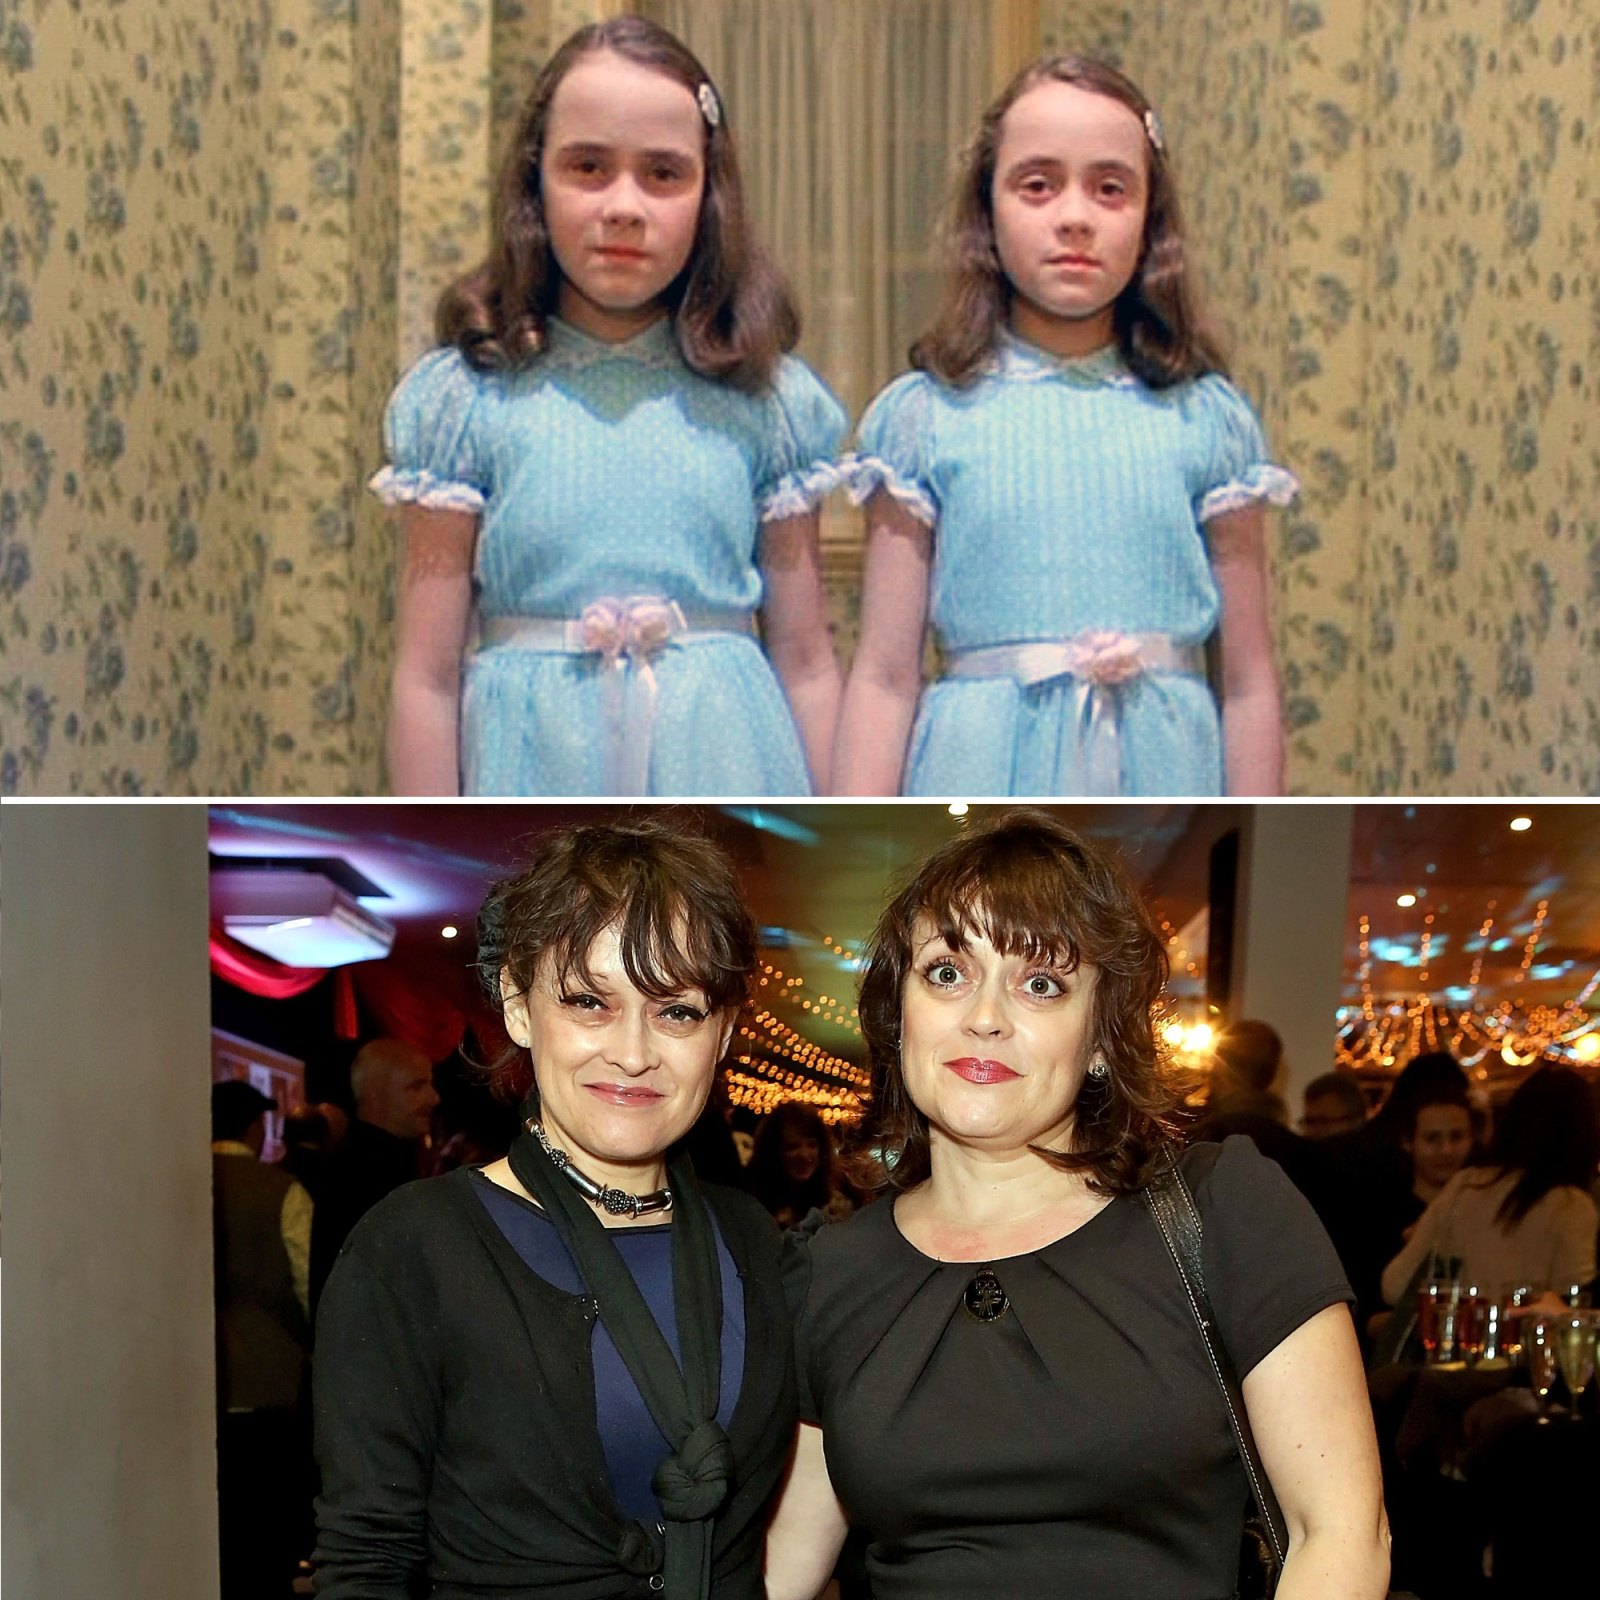 Lisa and Louise Burns Creepy Horror Movie Kids Where Are They Now? Drew Barrymore Haley Joel Osment and More